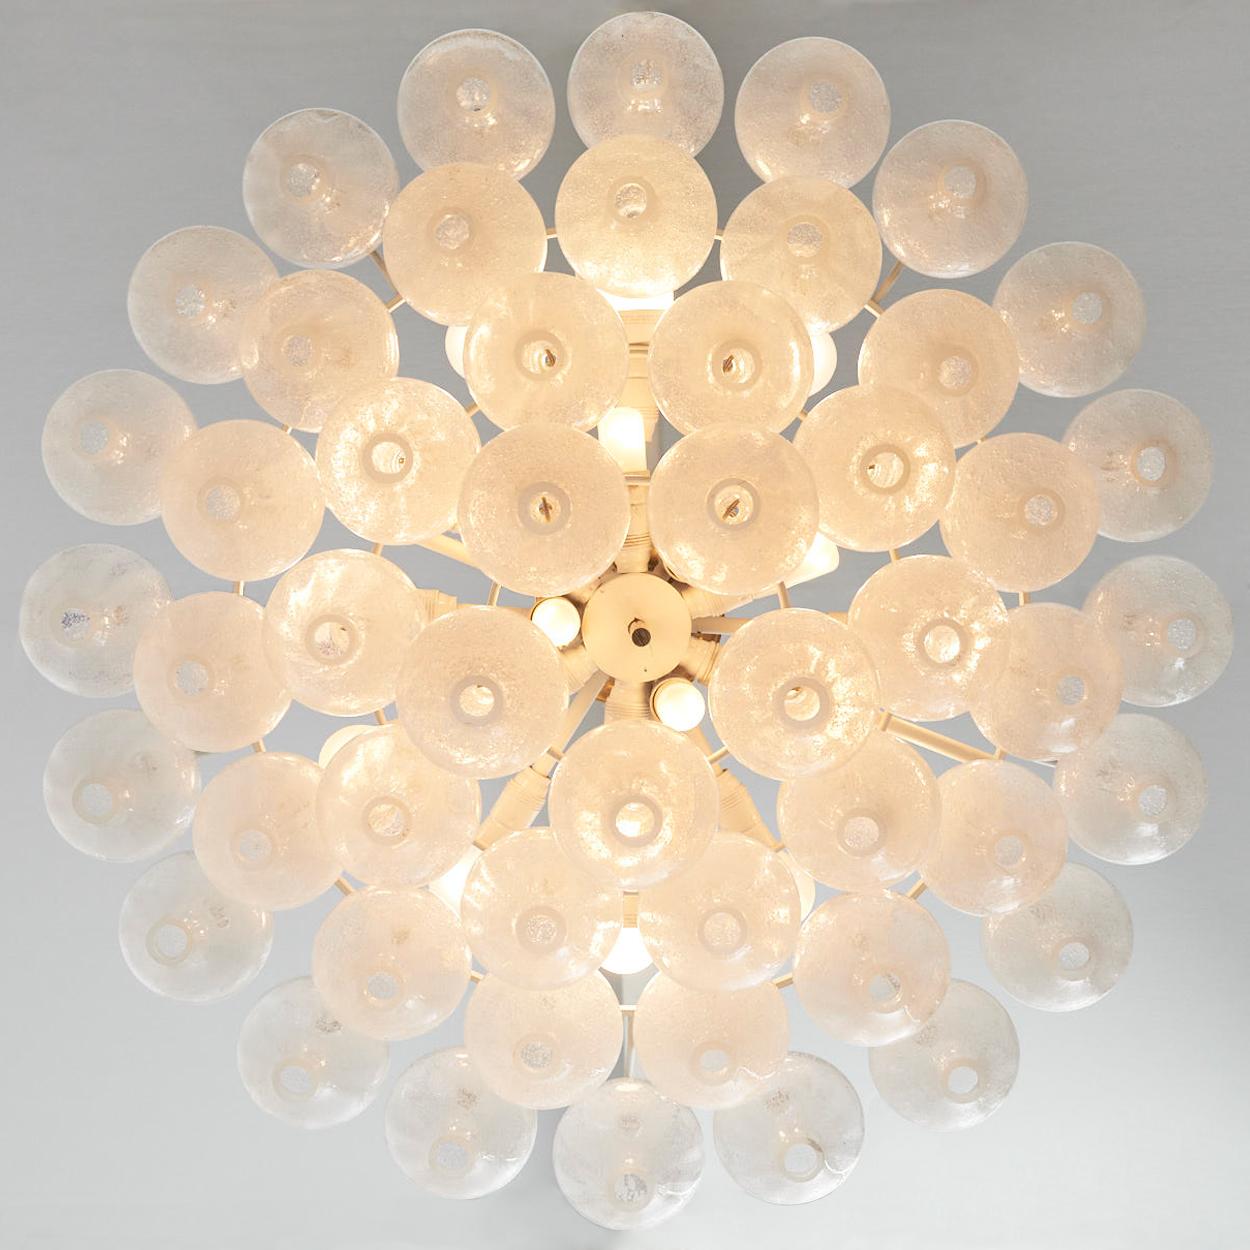 Exceptional huge 'Tulipan' flushmounts chandelier by J.T. Kalmar, Austria, Vienna, manufactured in midcentury, circa 1970, (late 1960s or early 1970s).
With beautiful Tulipan shaped hand blown bubble glasses. Several glasses are mounted with brass